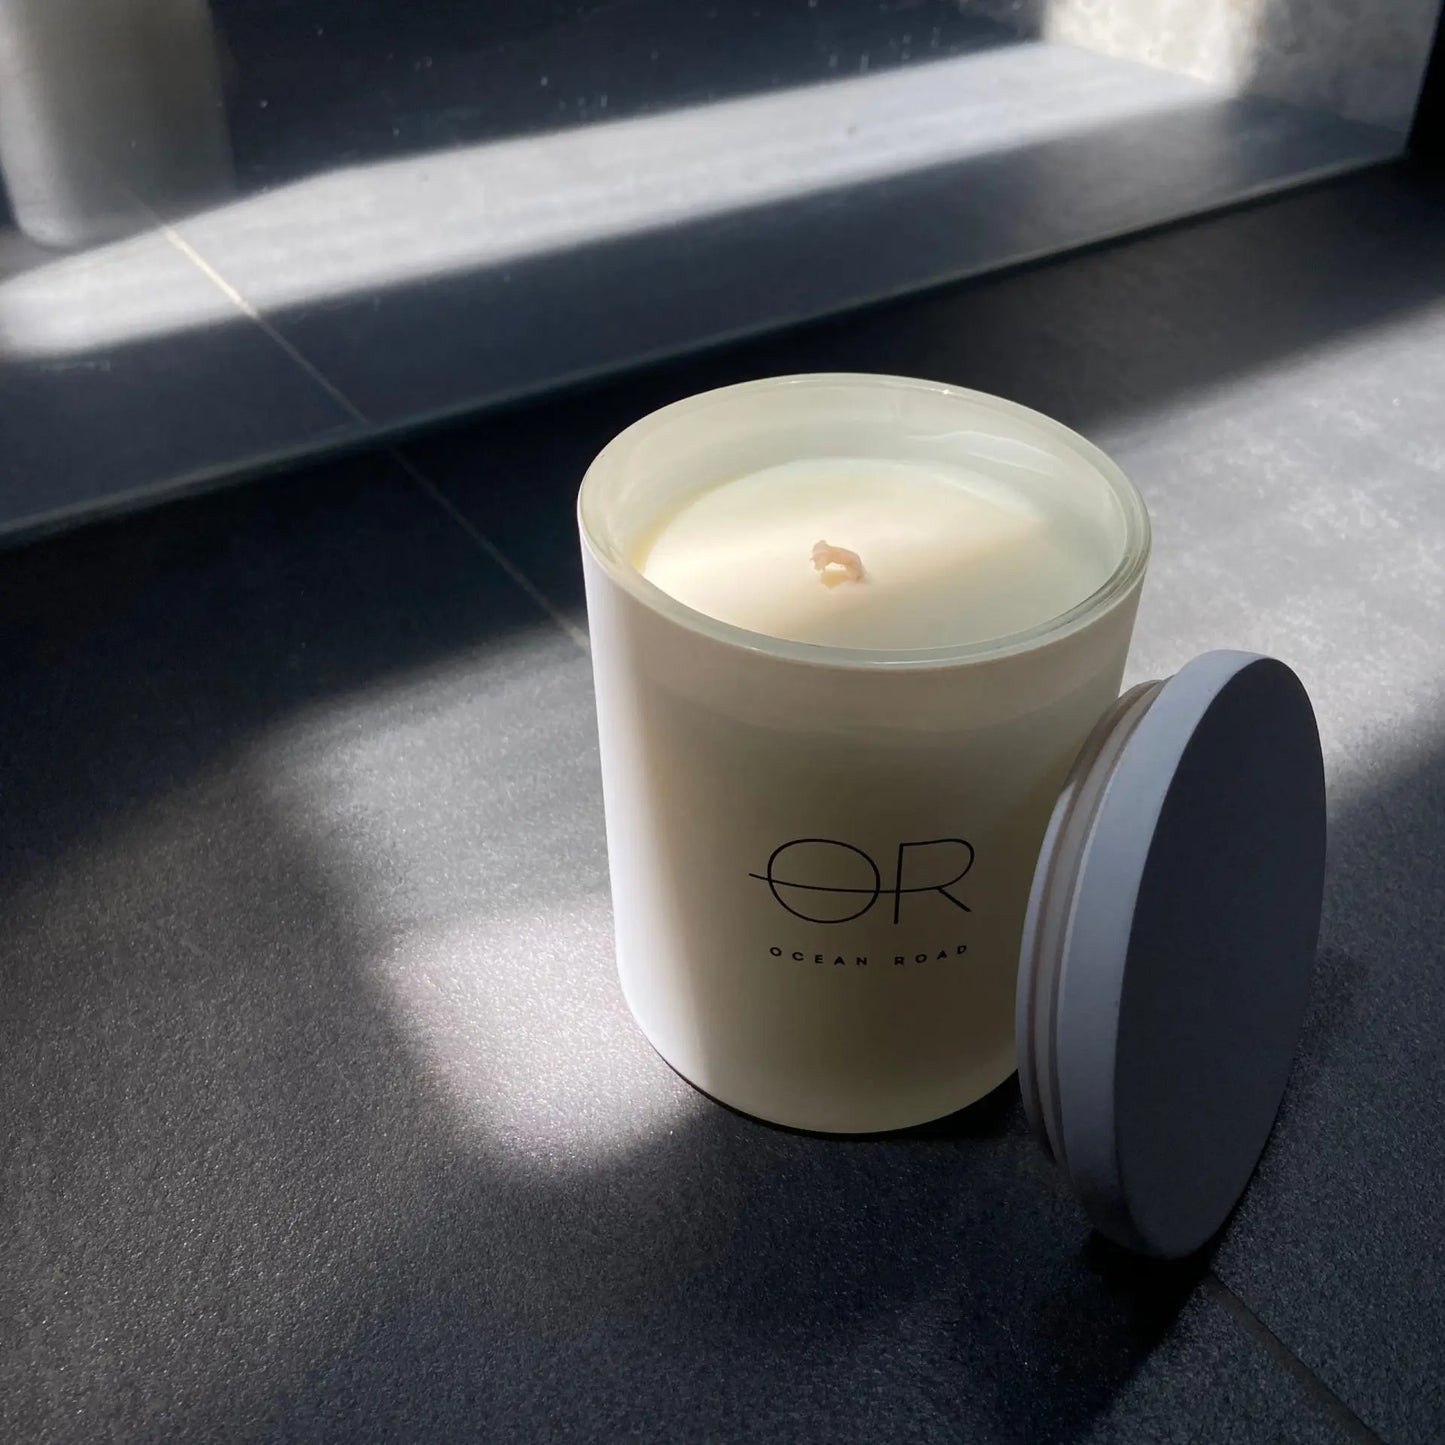 Ocean Road White Scented Candle